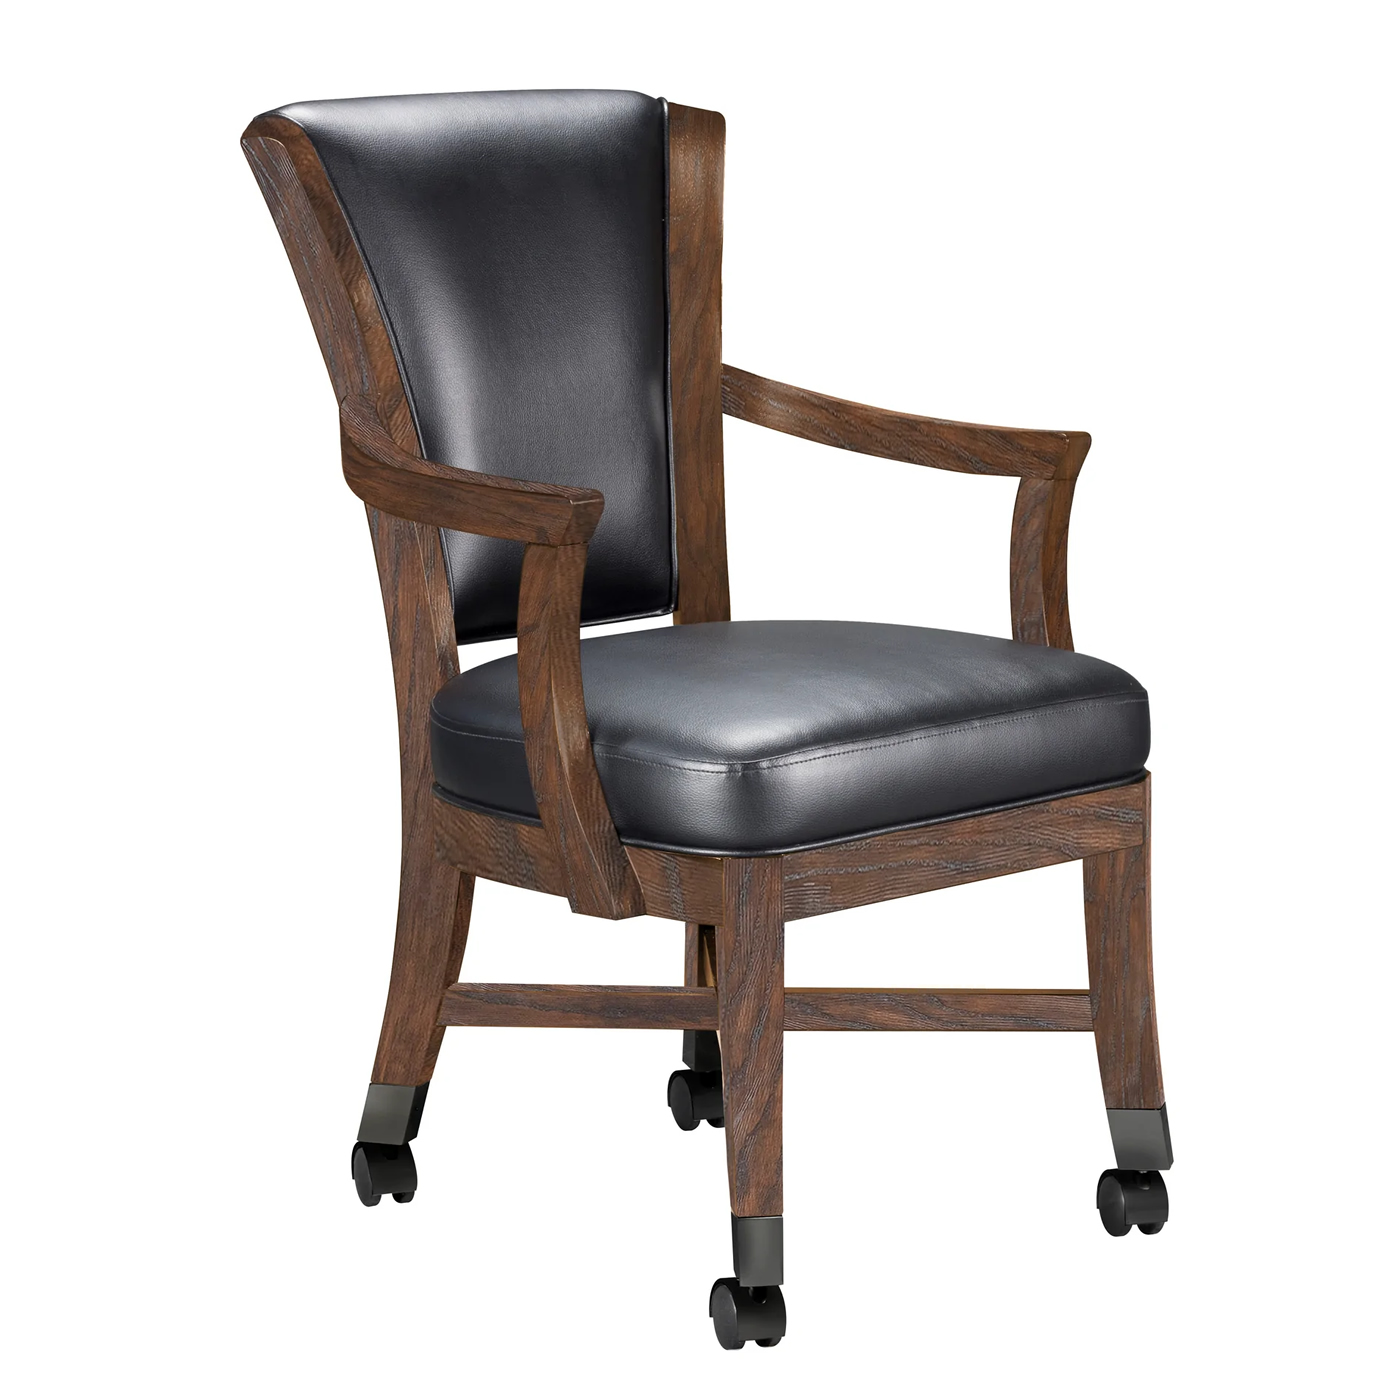 Harpeth Caster Game Chair by Legacy Billiards